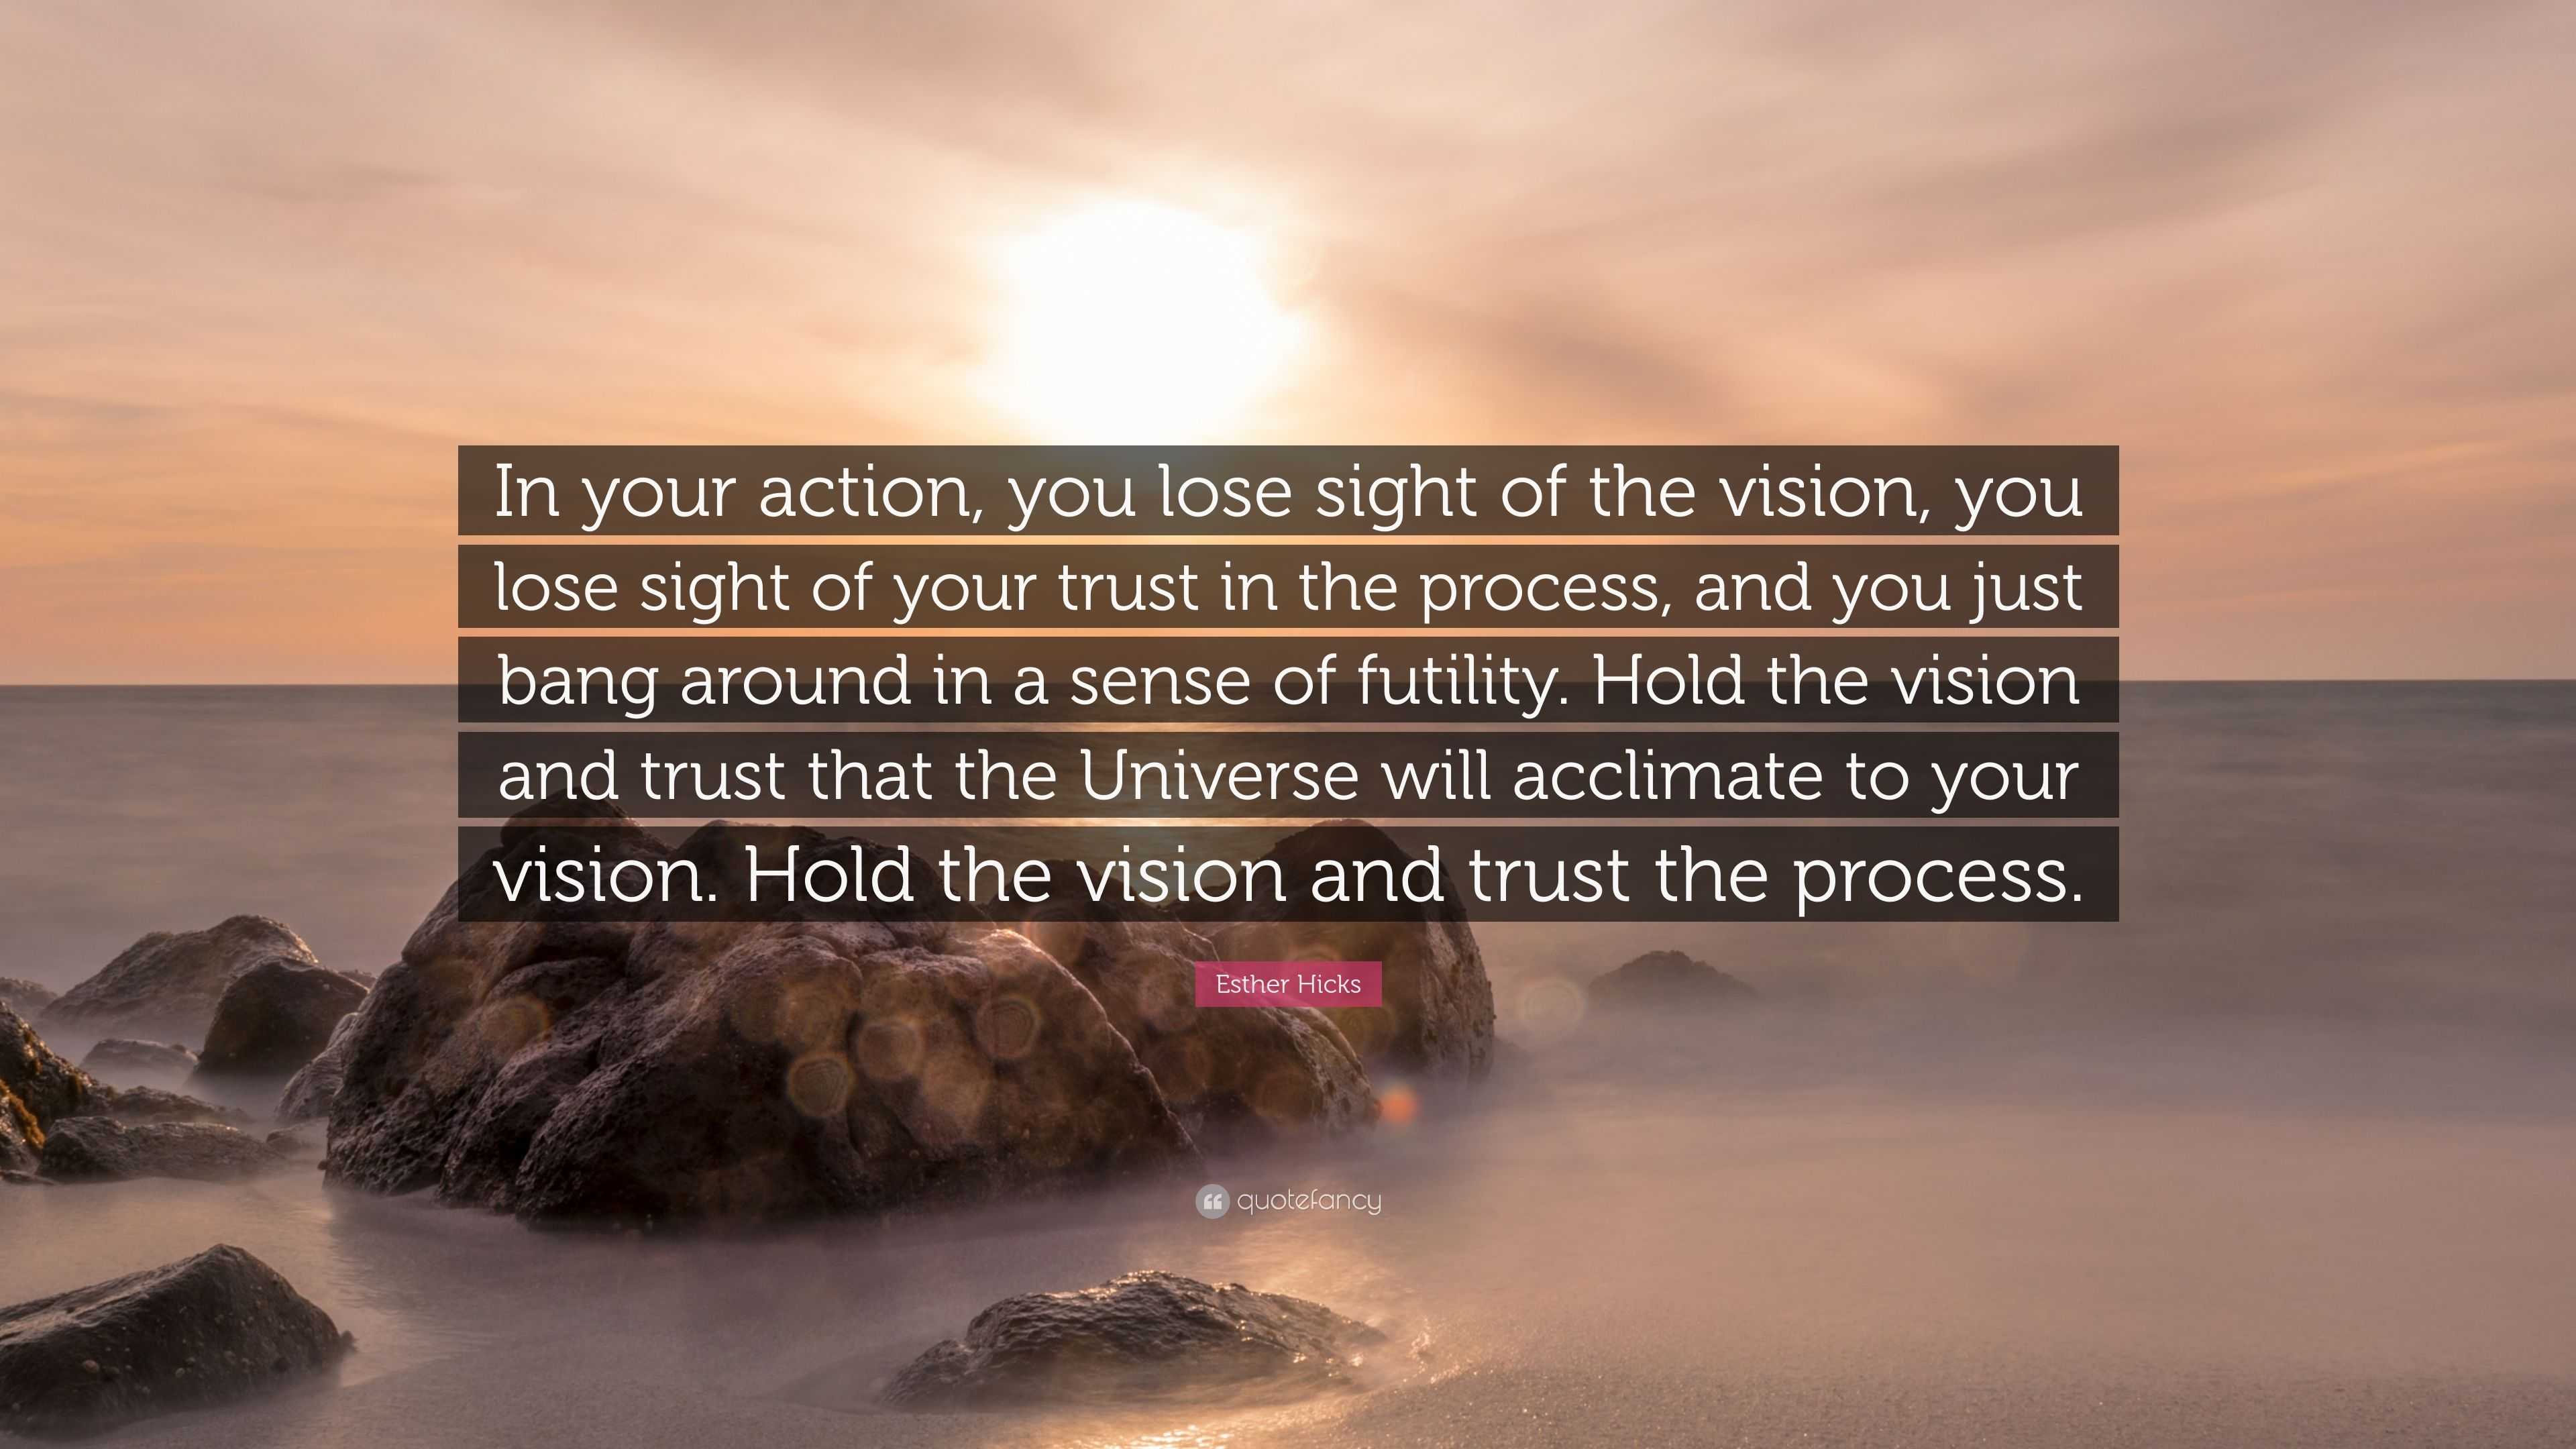 4828257 Esther Hicks Quote In your action you lose sight of the vision you